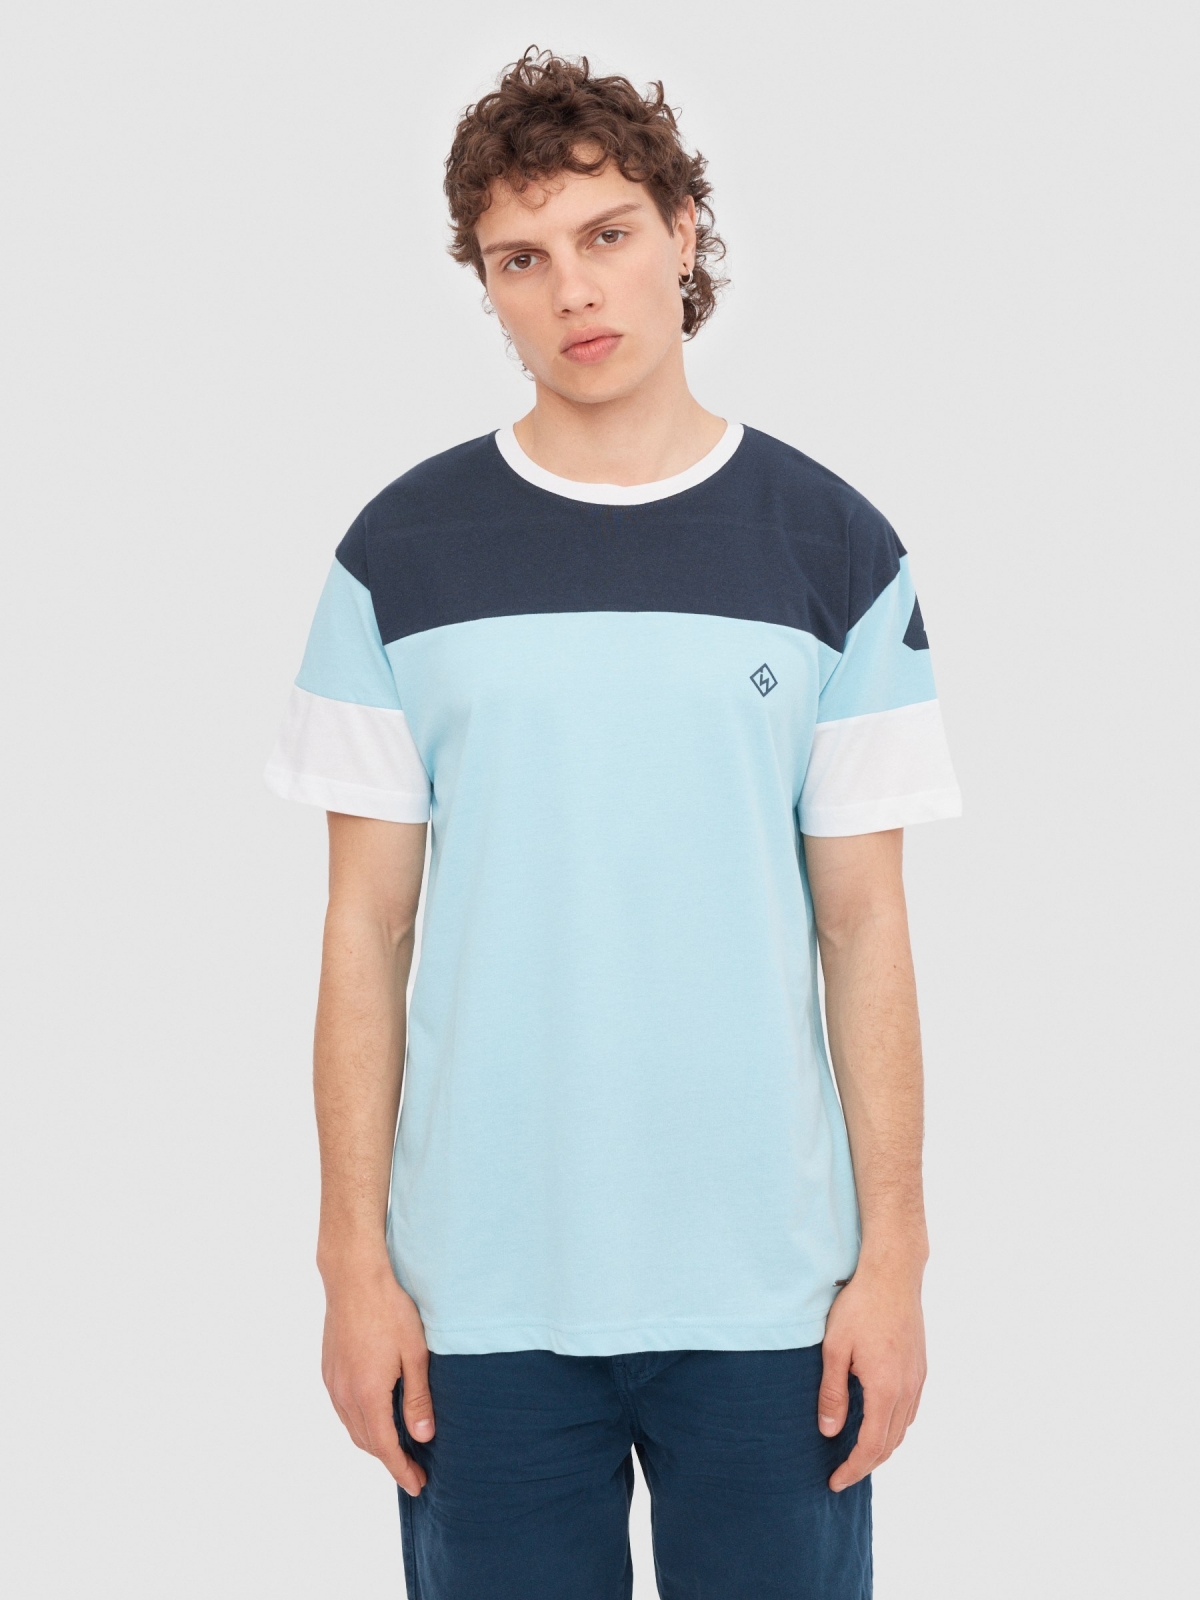 Textured sports t-shirt light blue middle front view